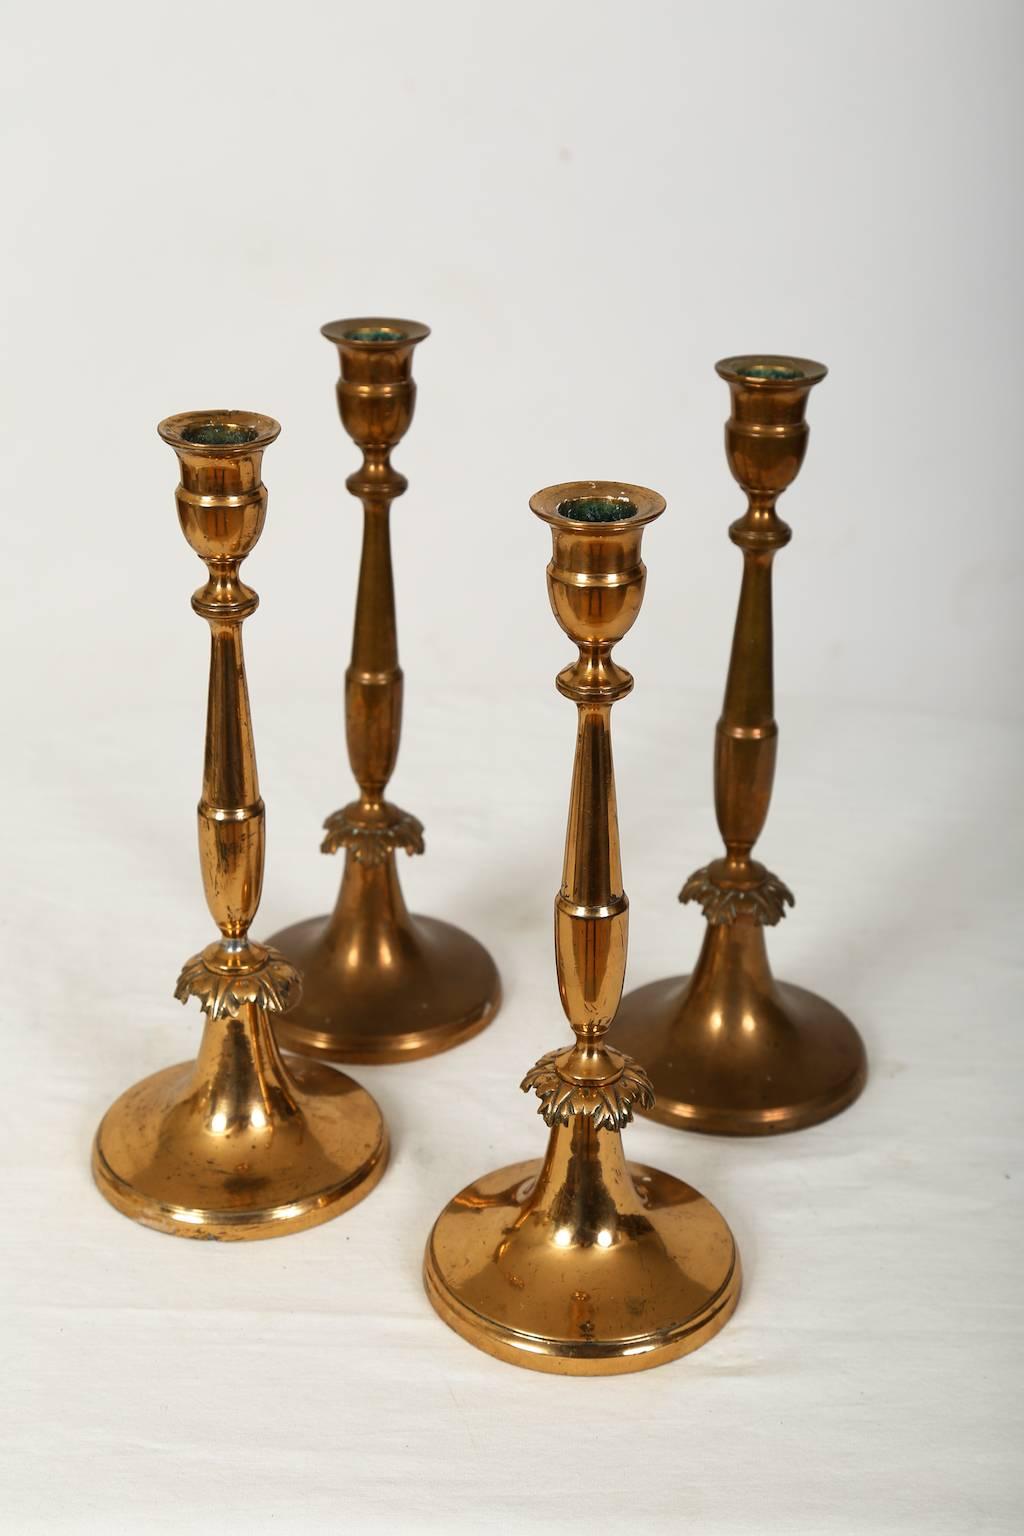 A unique set of four Swedish Empire brass candle holders, circa 1830.
One of the pairs is polished to higher gloss as seen in the image.